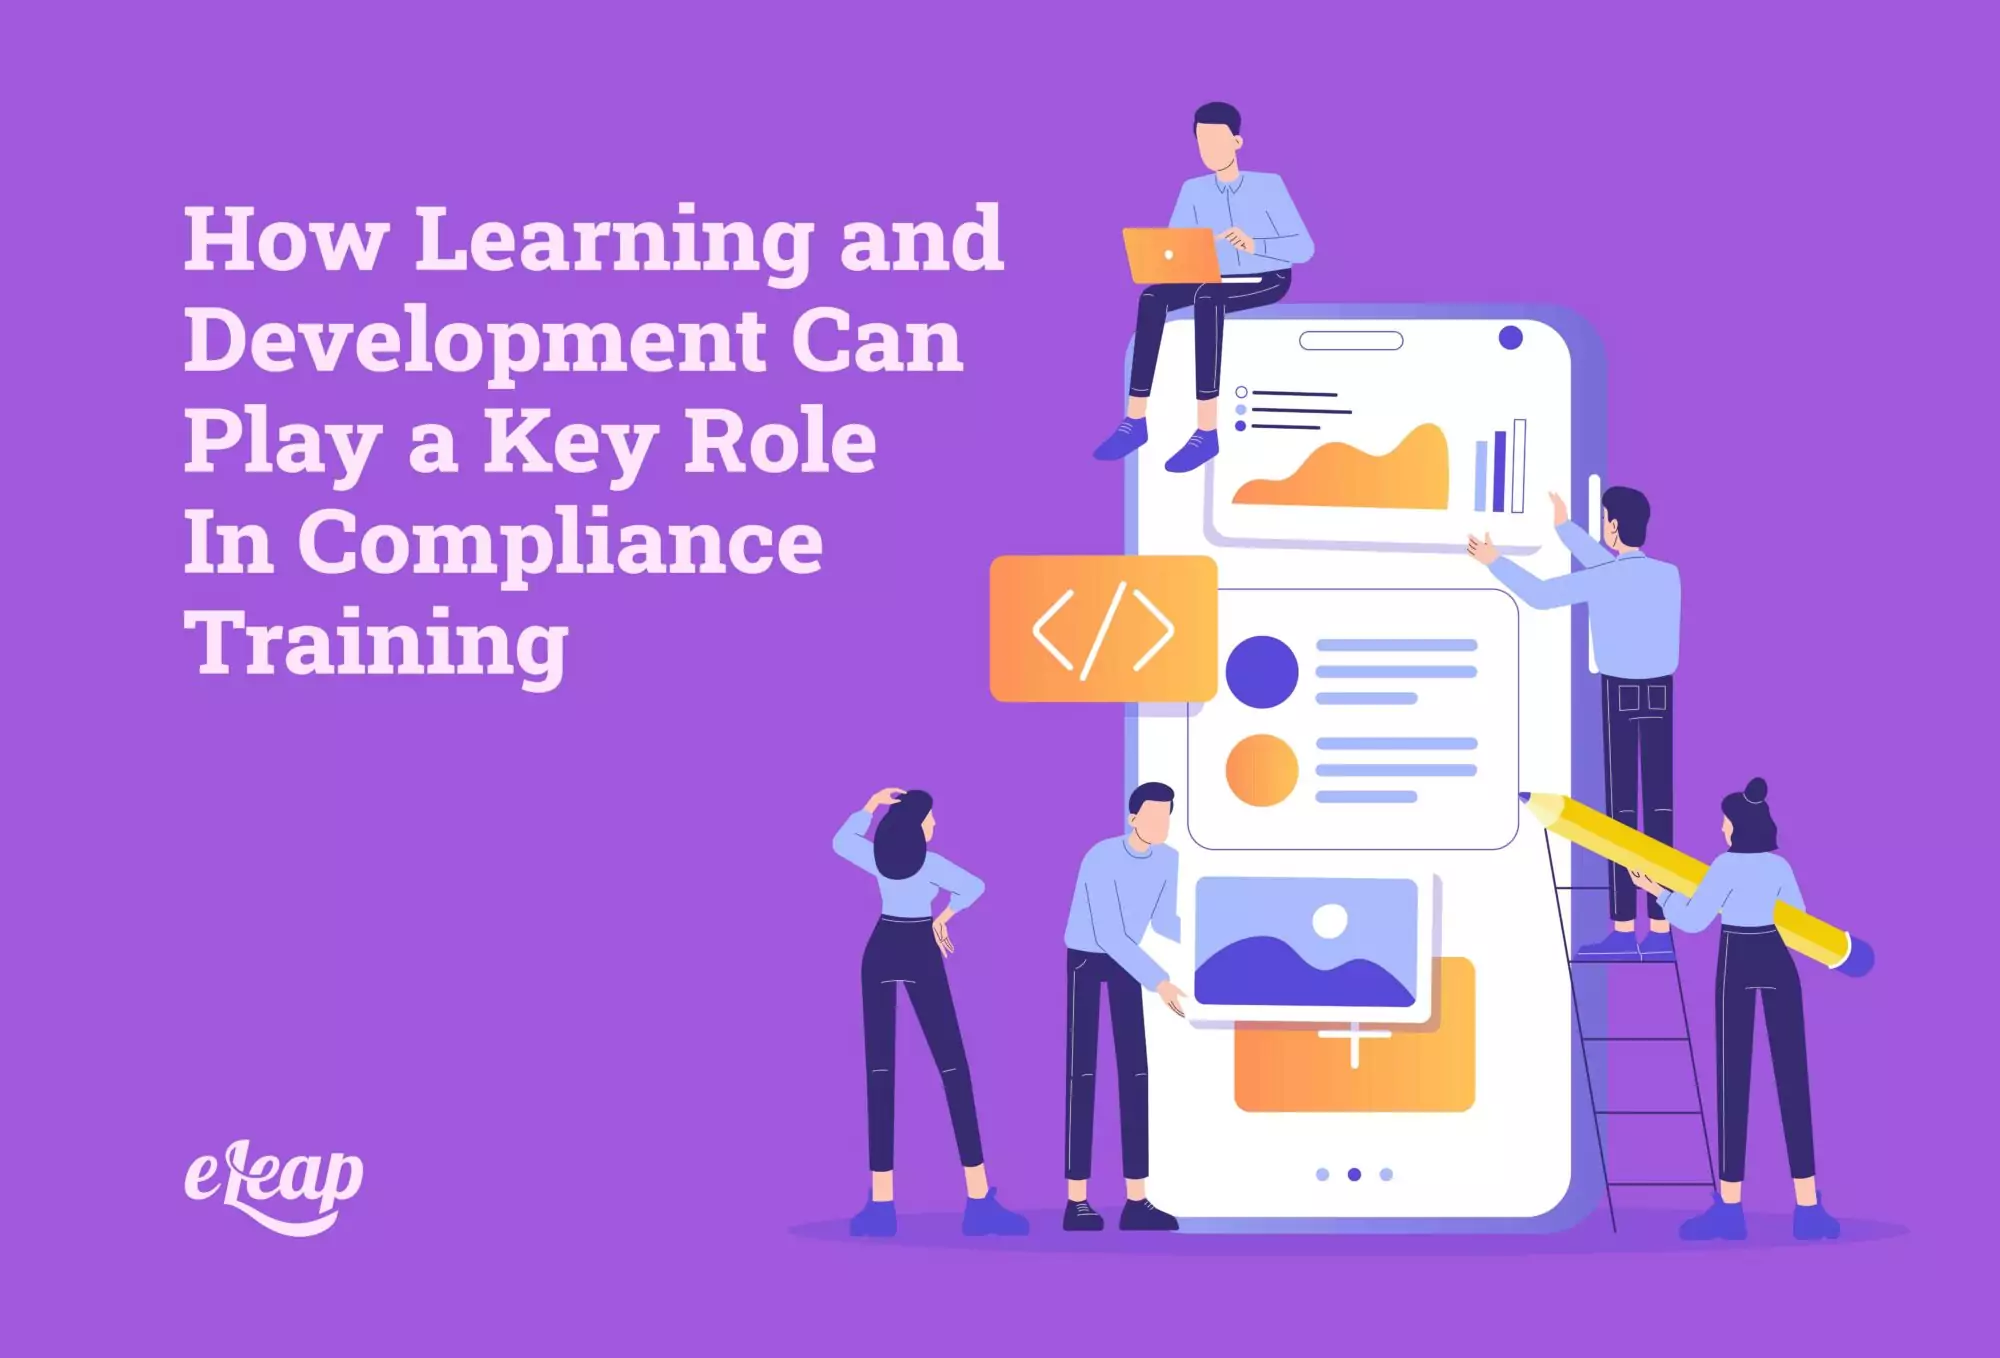 How Learning and Development Can Play a Key Role In Compliance Training